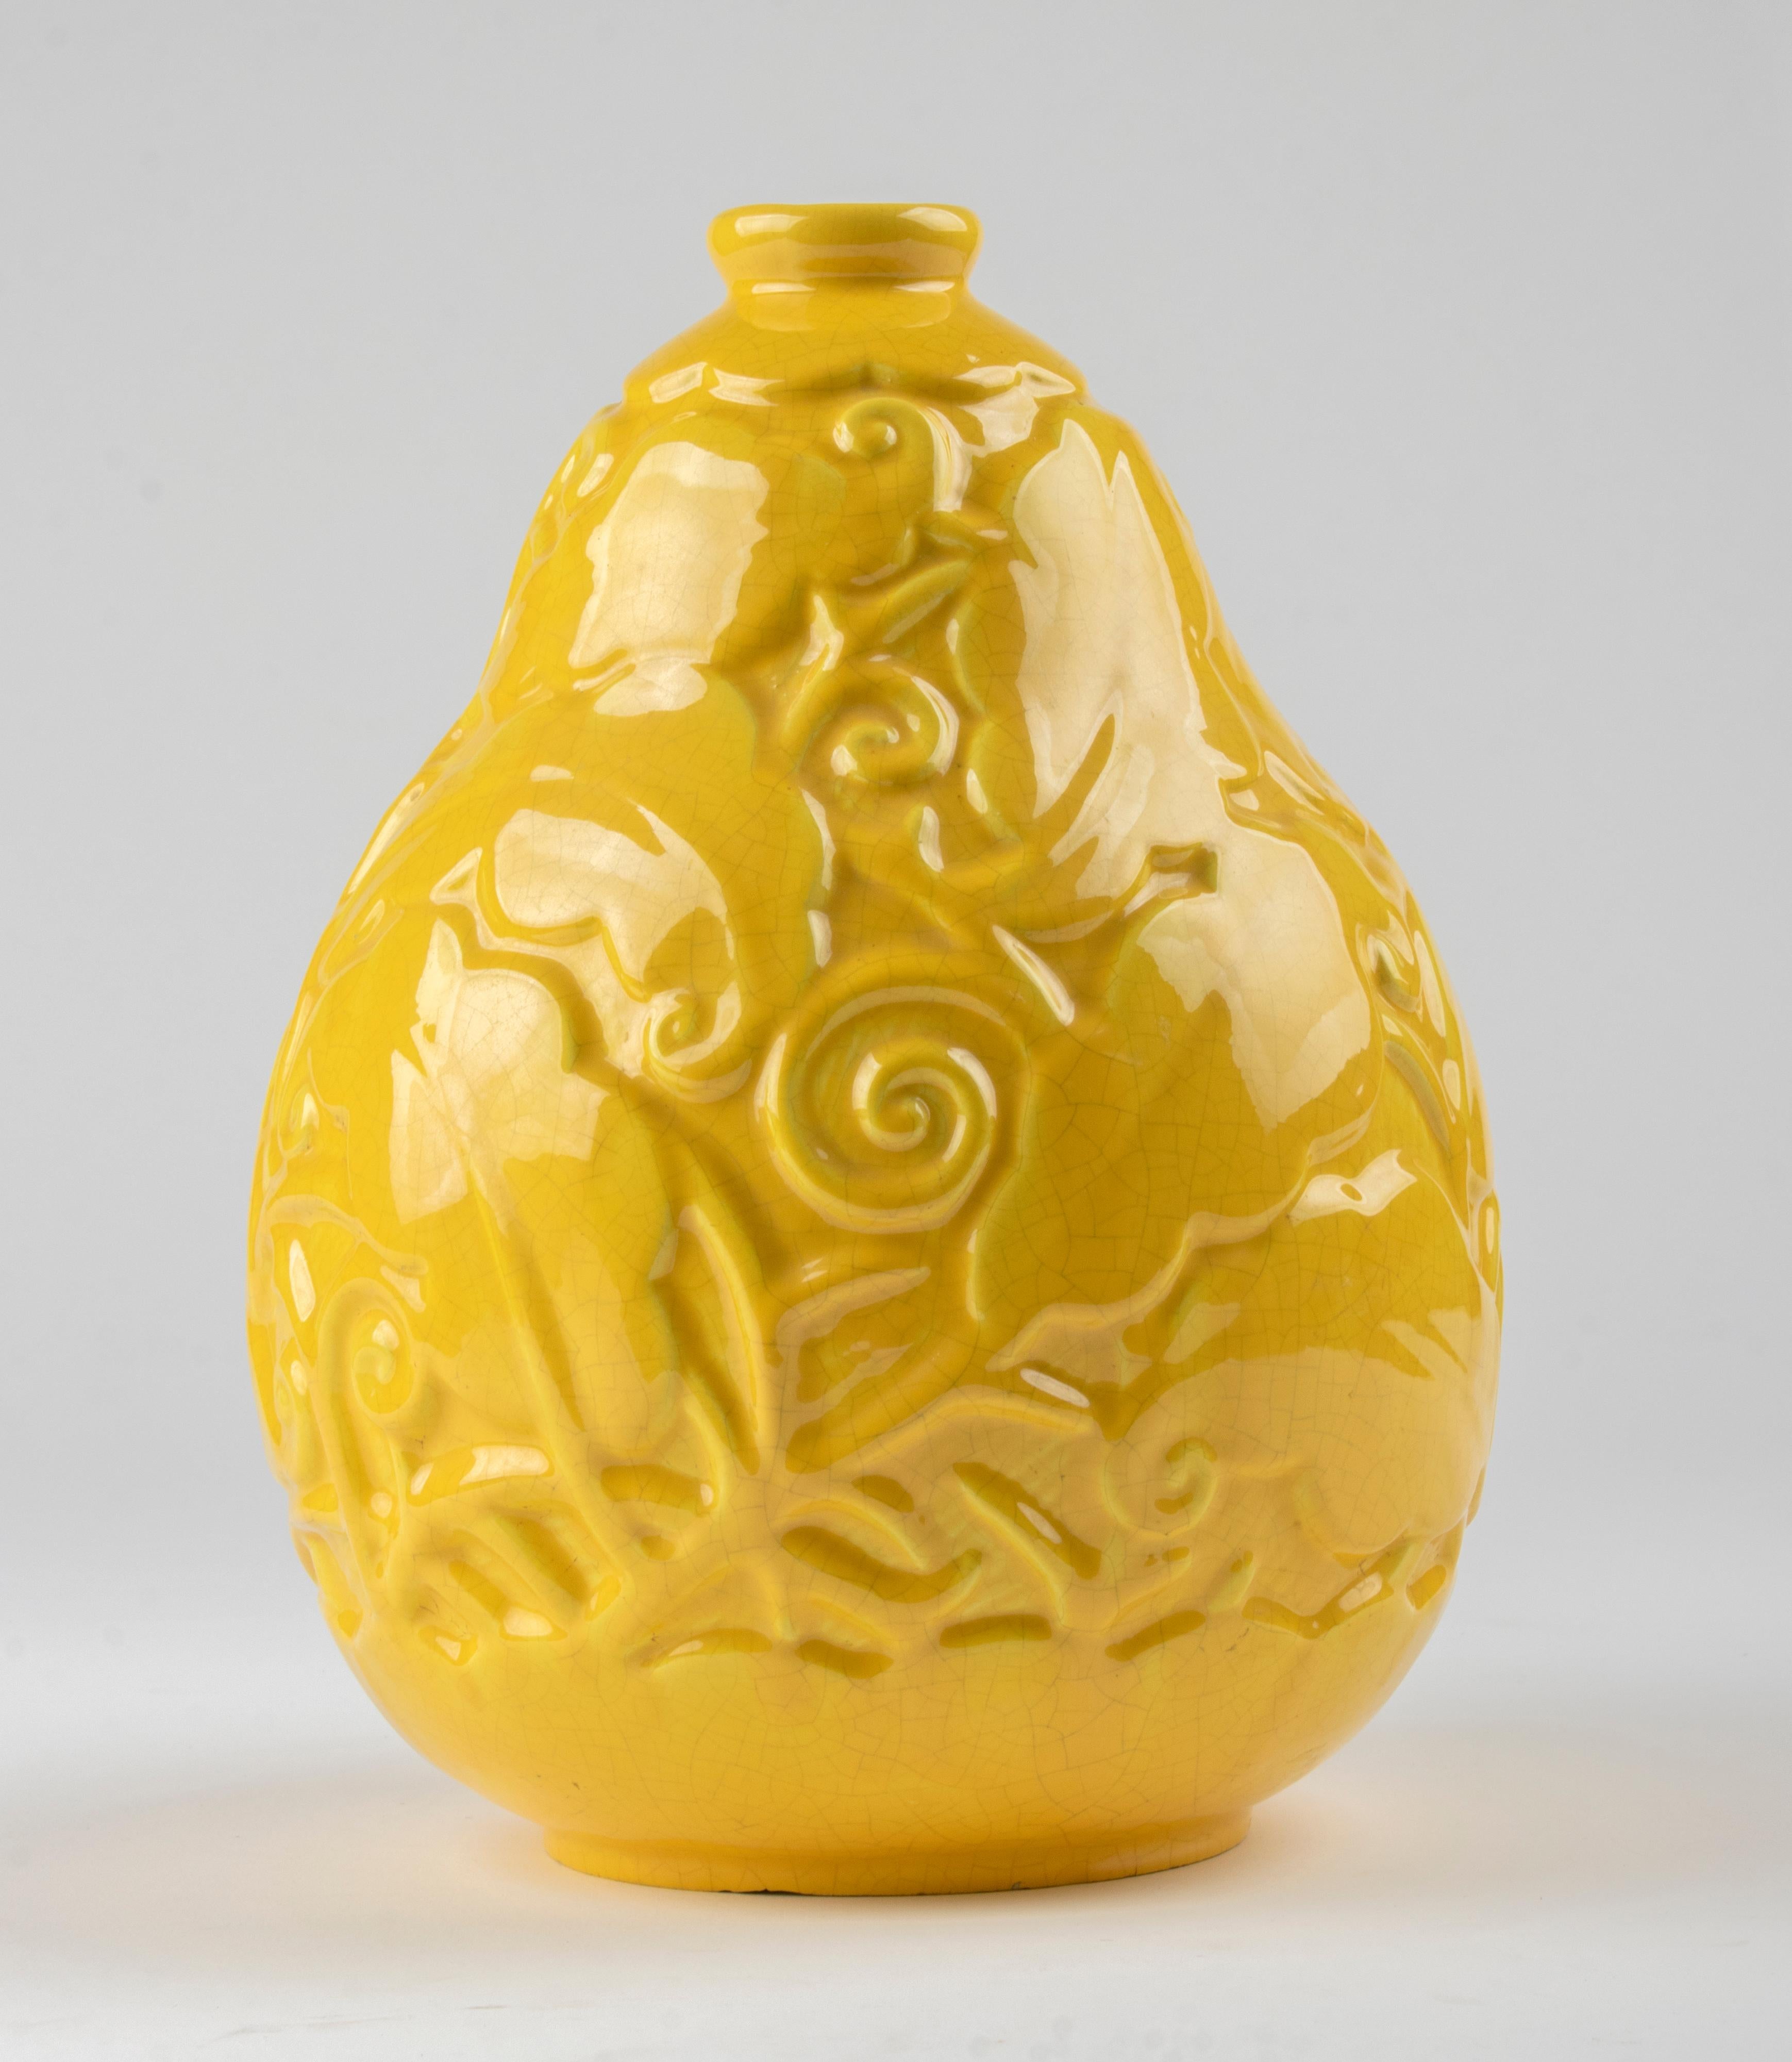 French Early 20th Century Ceramic Art Deco Vase Made by Saint-Clément